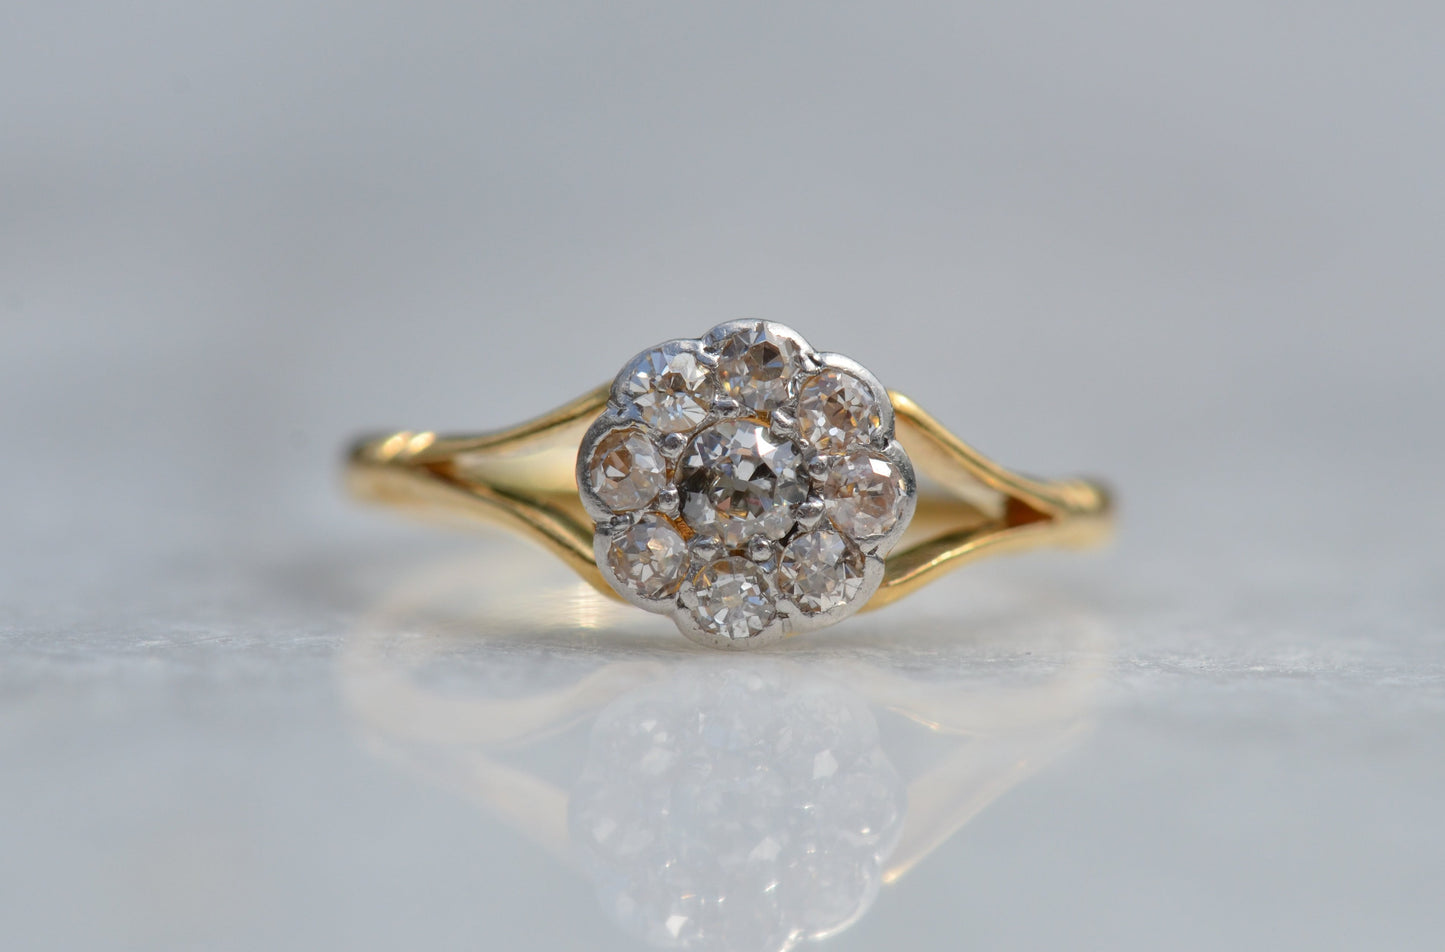 Darling Antique Baby Daisy Ring